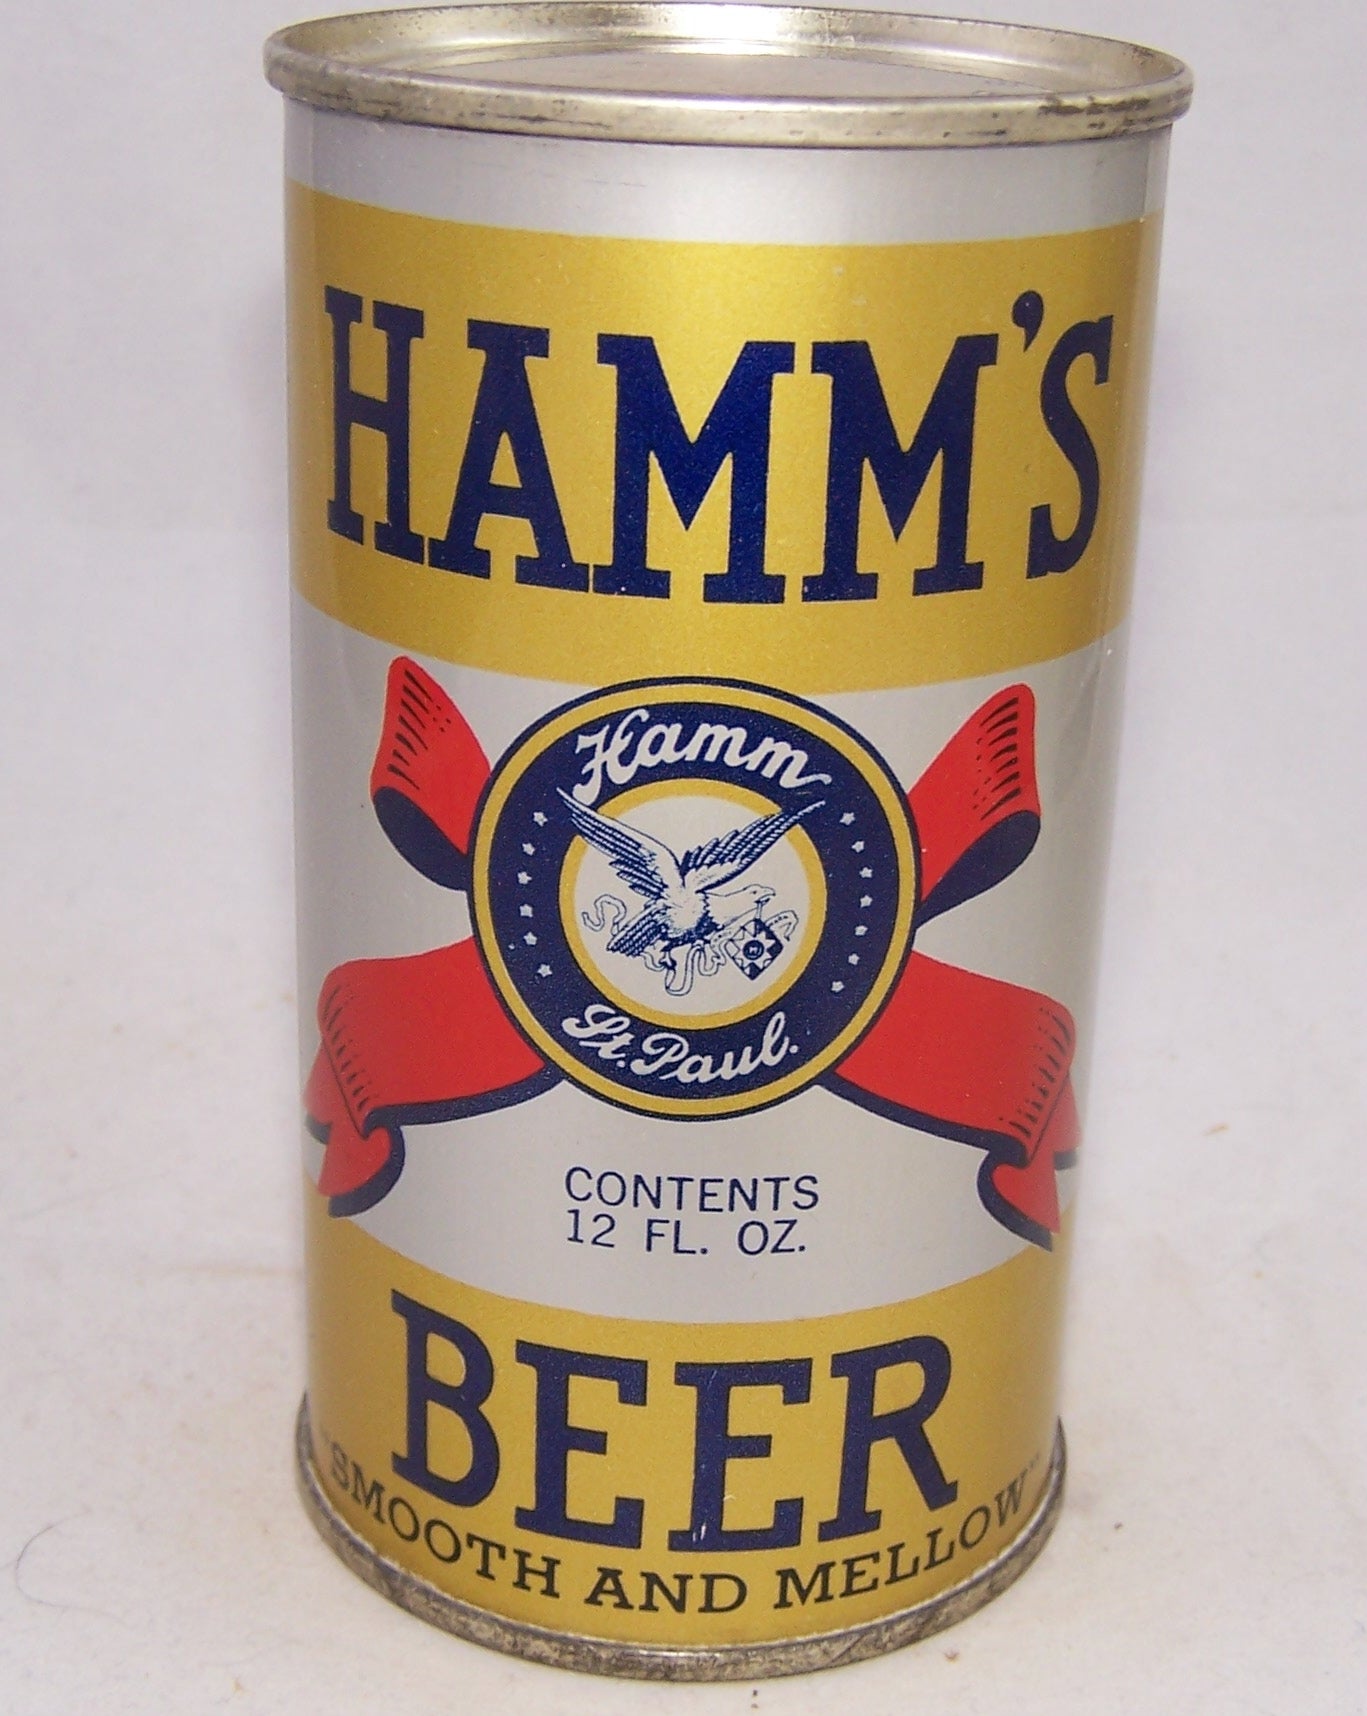 Hamm's Beer " Smooth and Mellow" Lilek # 380, Grade A1+ Sold on 03/22/18